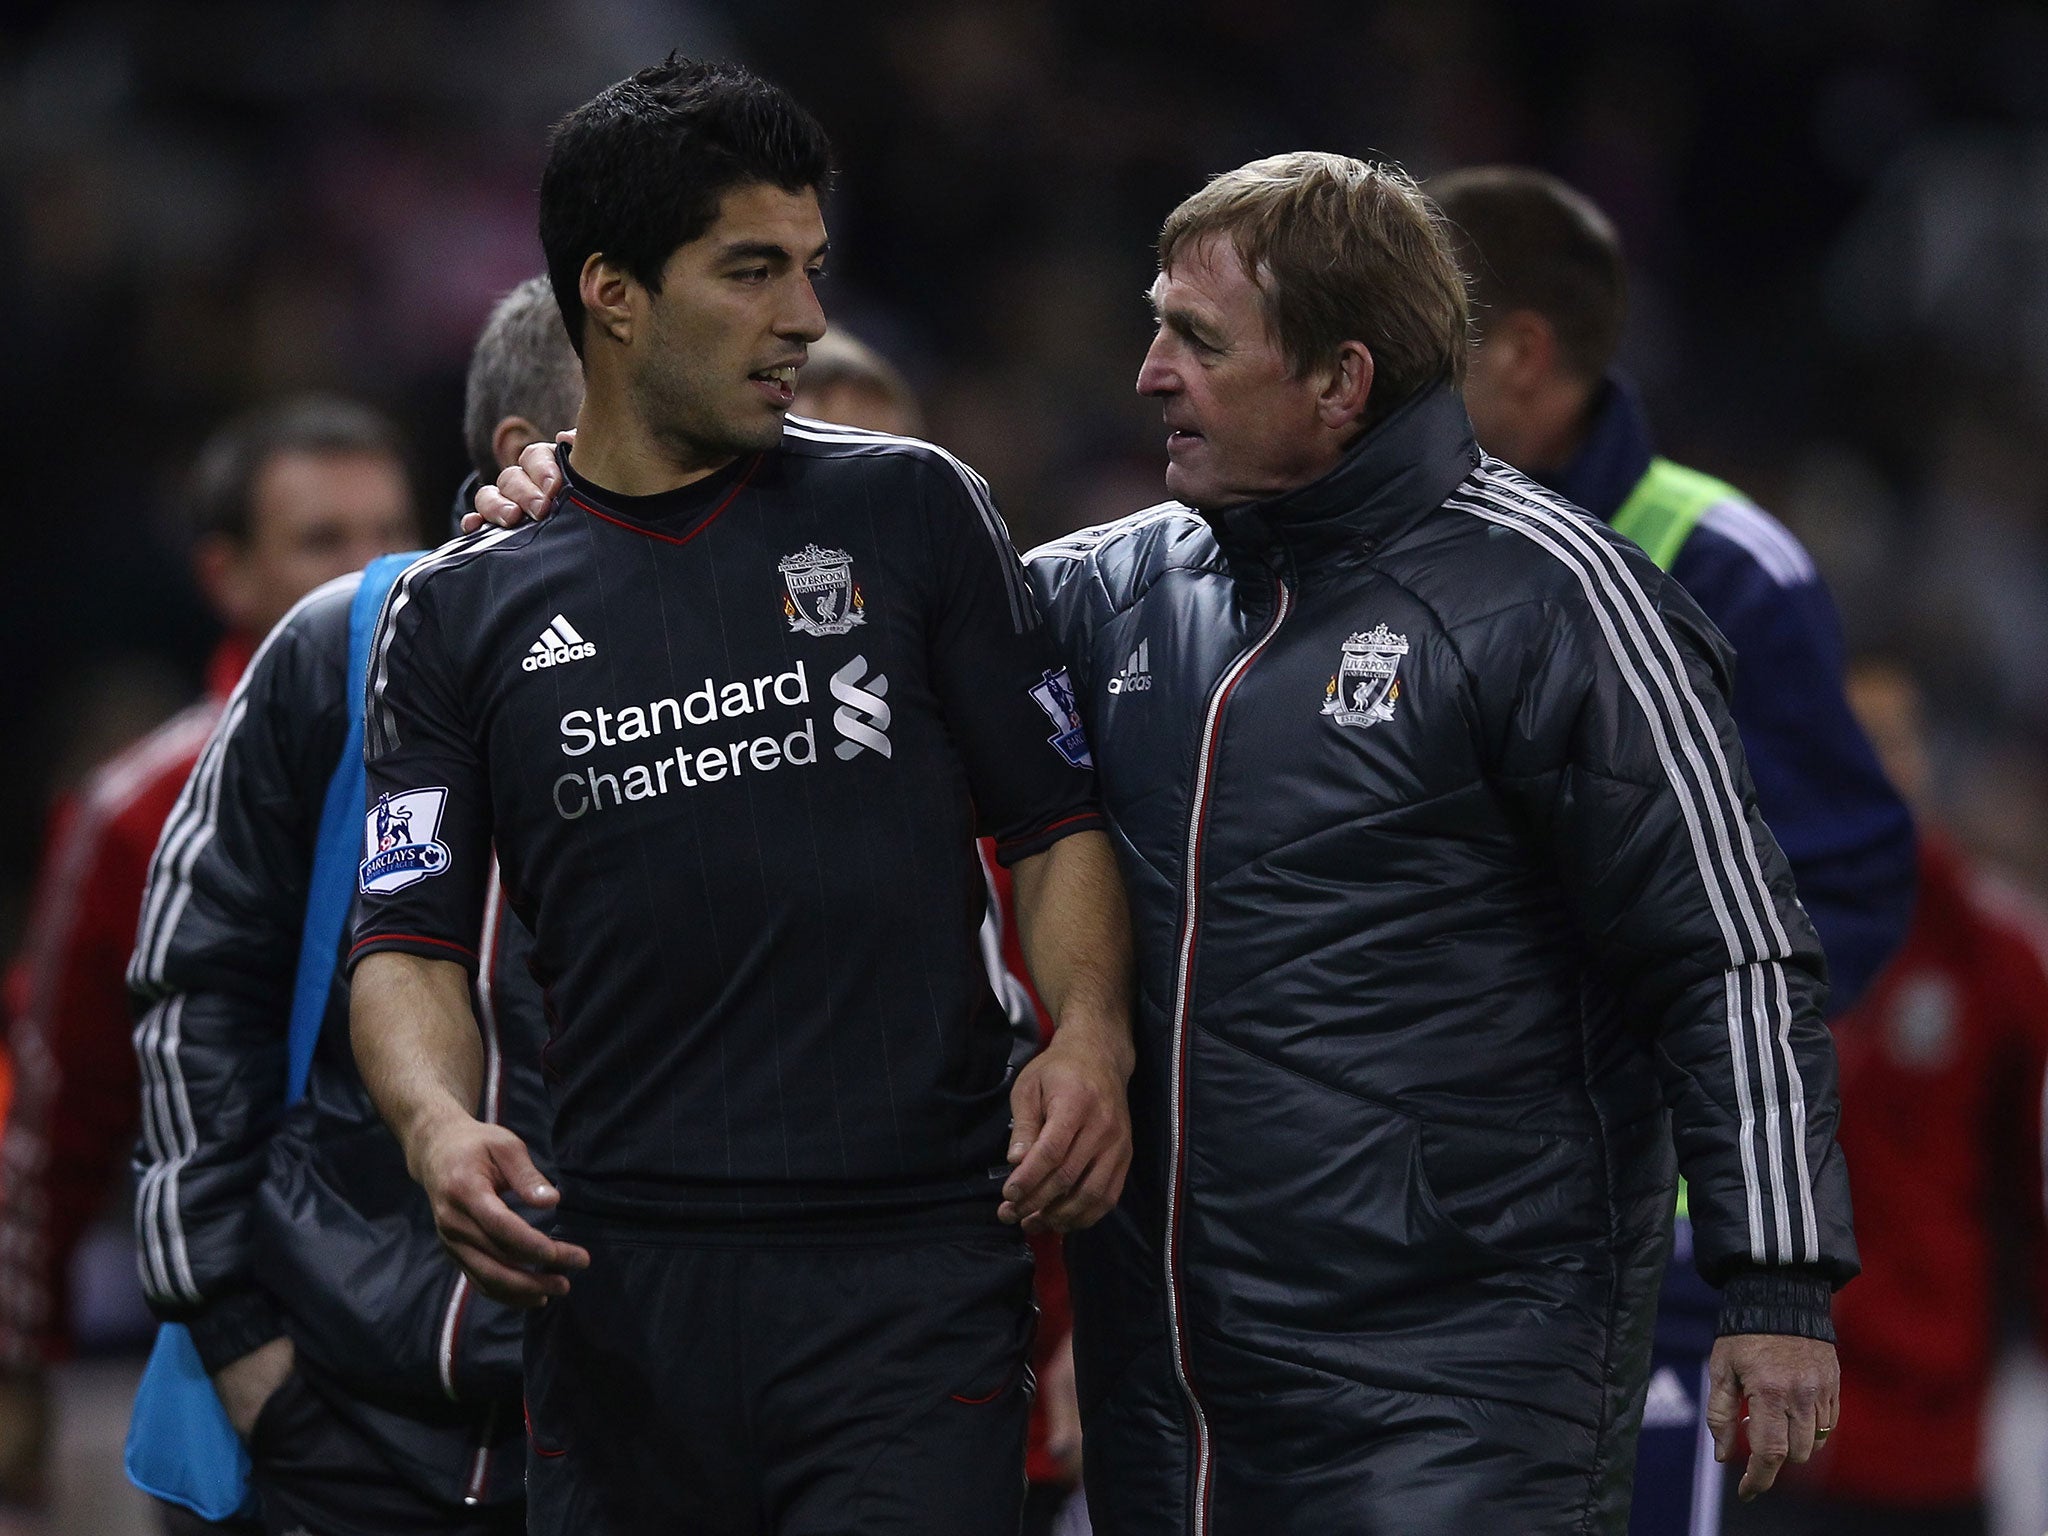 Luis Suarez and Kenny Dalglish back in October 2011 when Dalglish was his manager at Liverpool